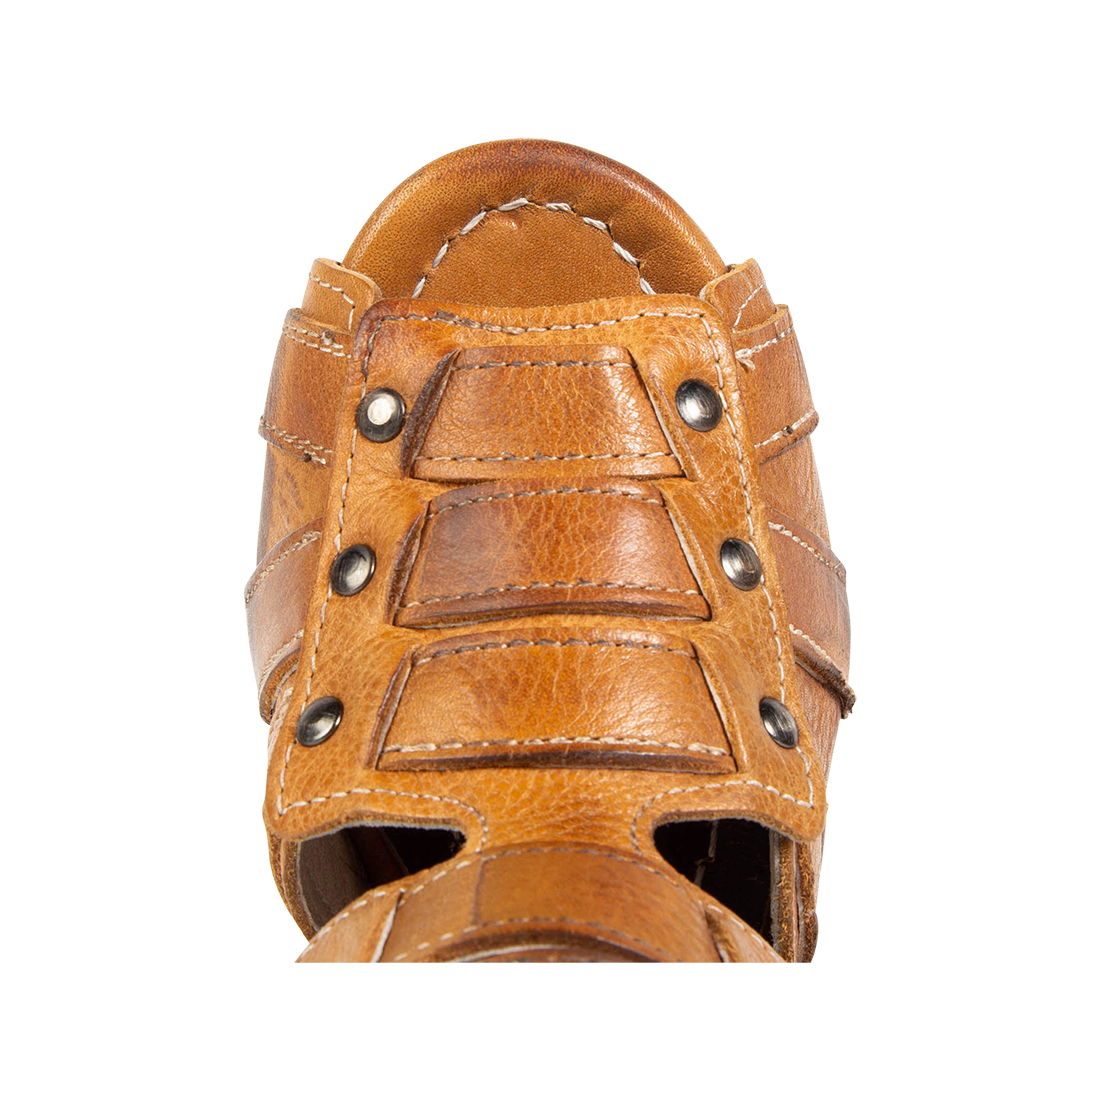 Top view showing leather and stud detailing FREEBIRD women's Zane wheat multi heeled sandal